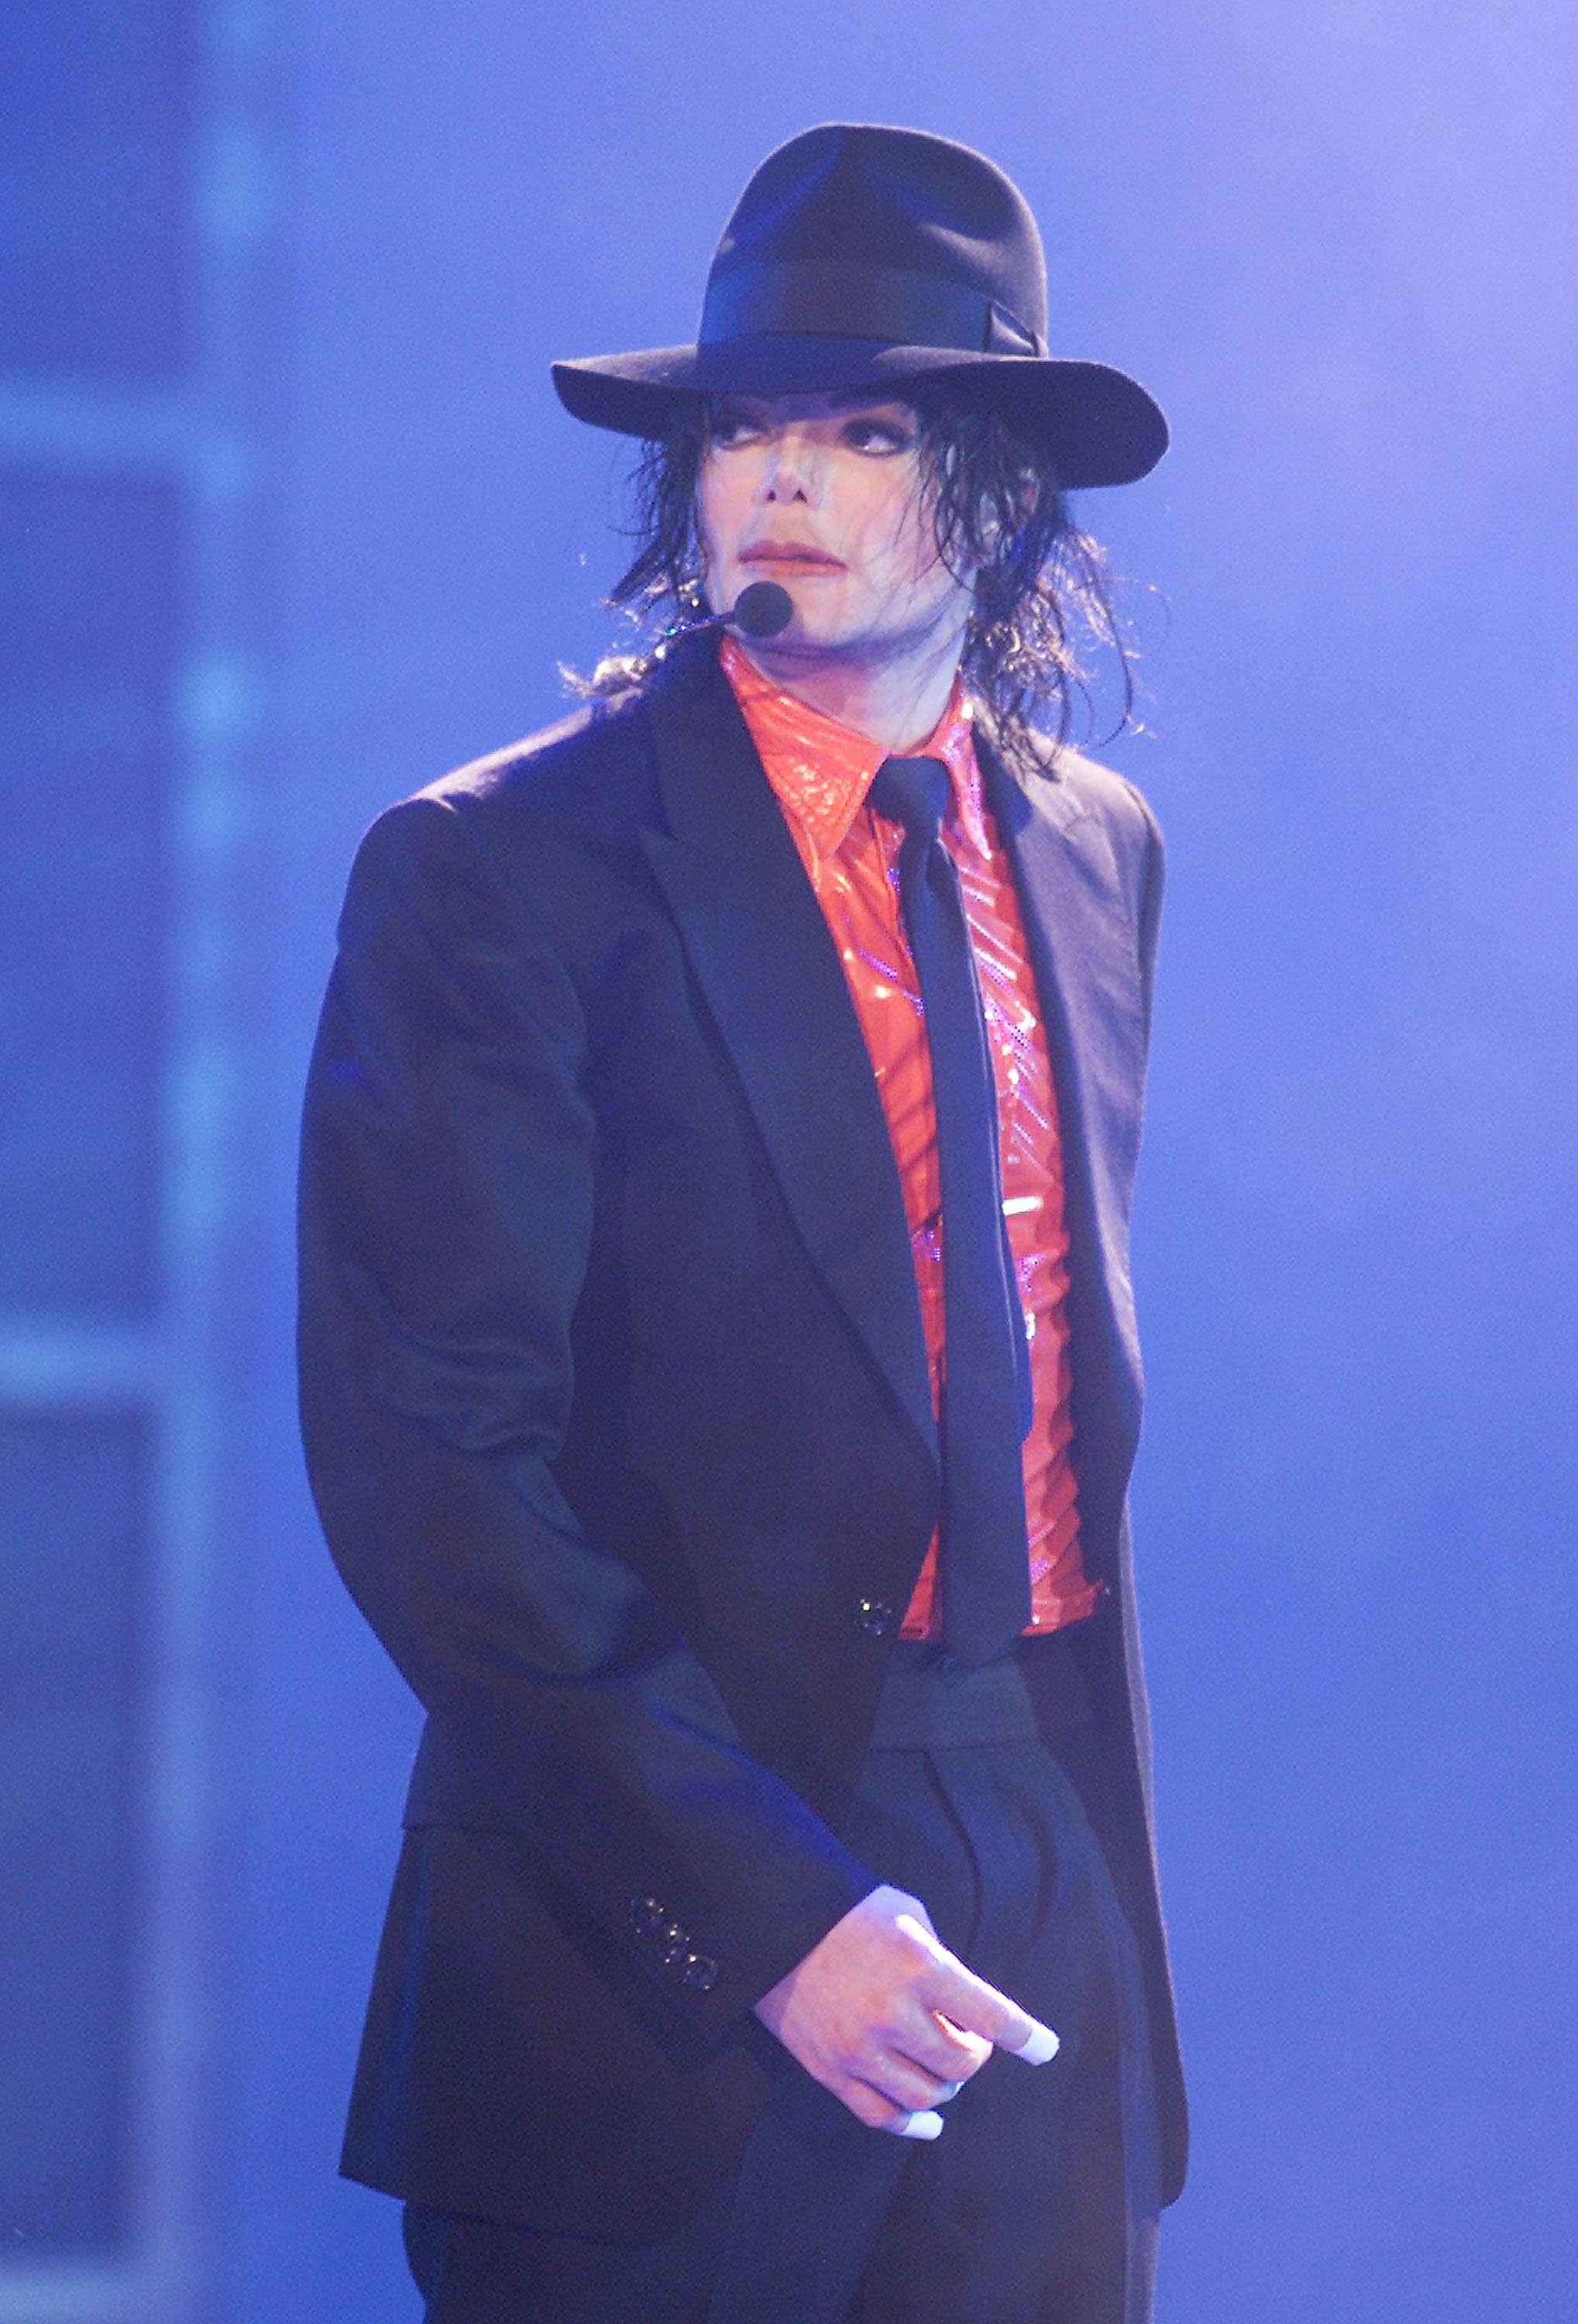 Michael Jackson, also known as the King of Pop during a performance in 2002. | Photo: Getty Images